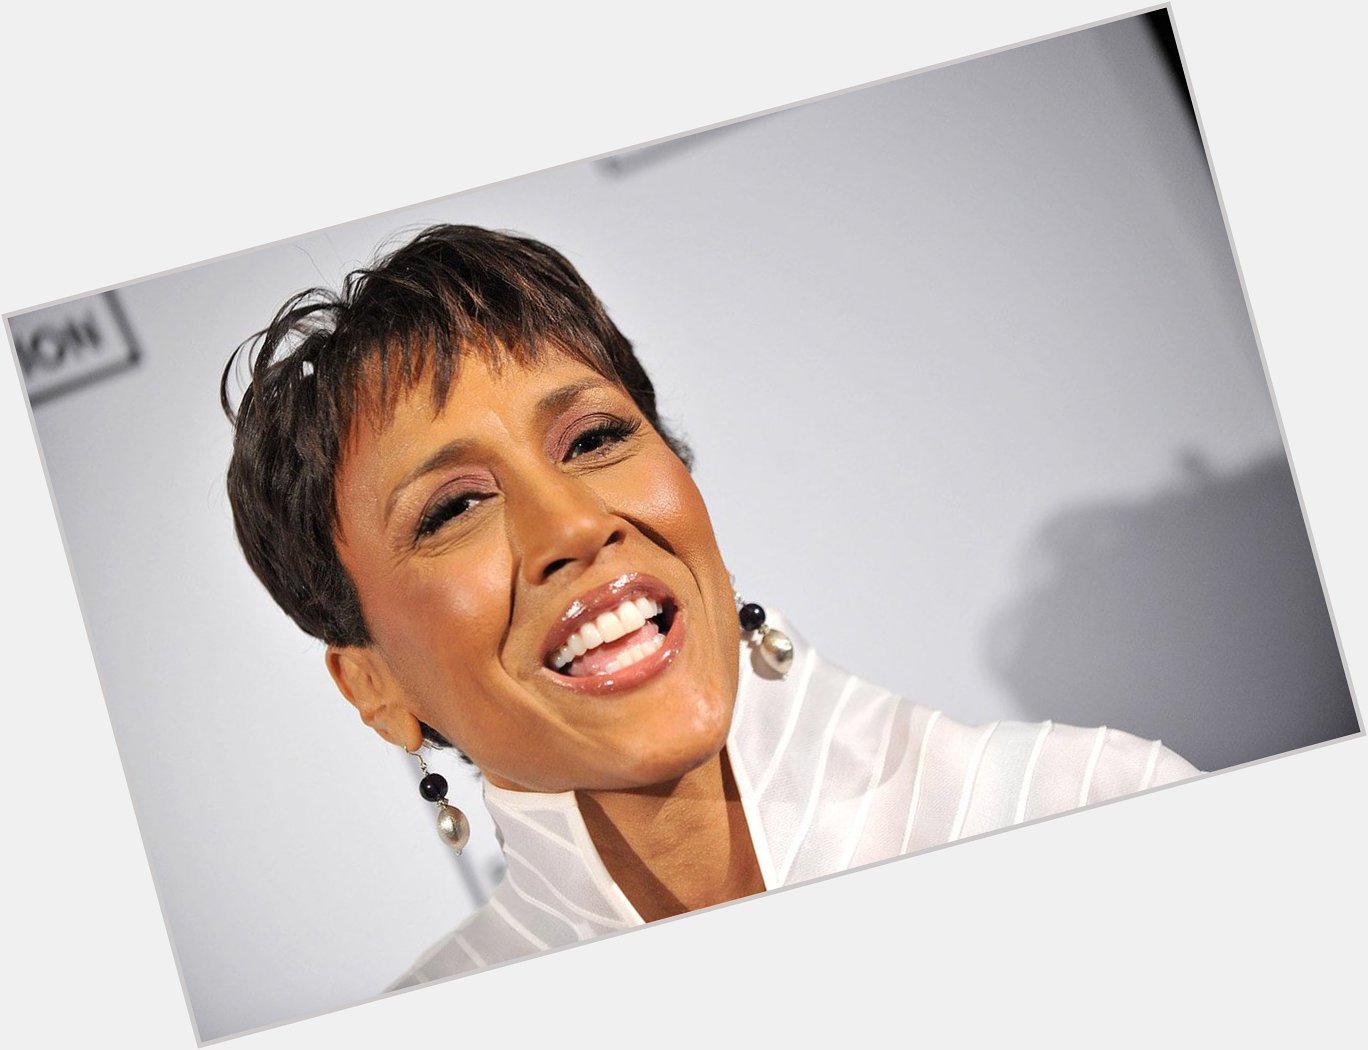 Happy Birthday, Robin Roberts! The Host\s Most Inspiring Words of Hard-Earned Wisdom  